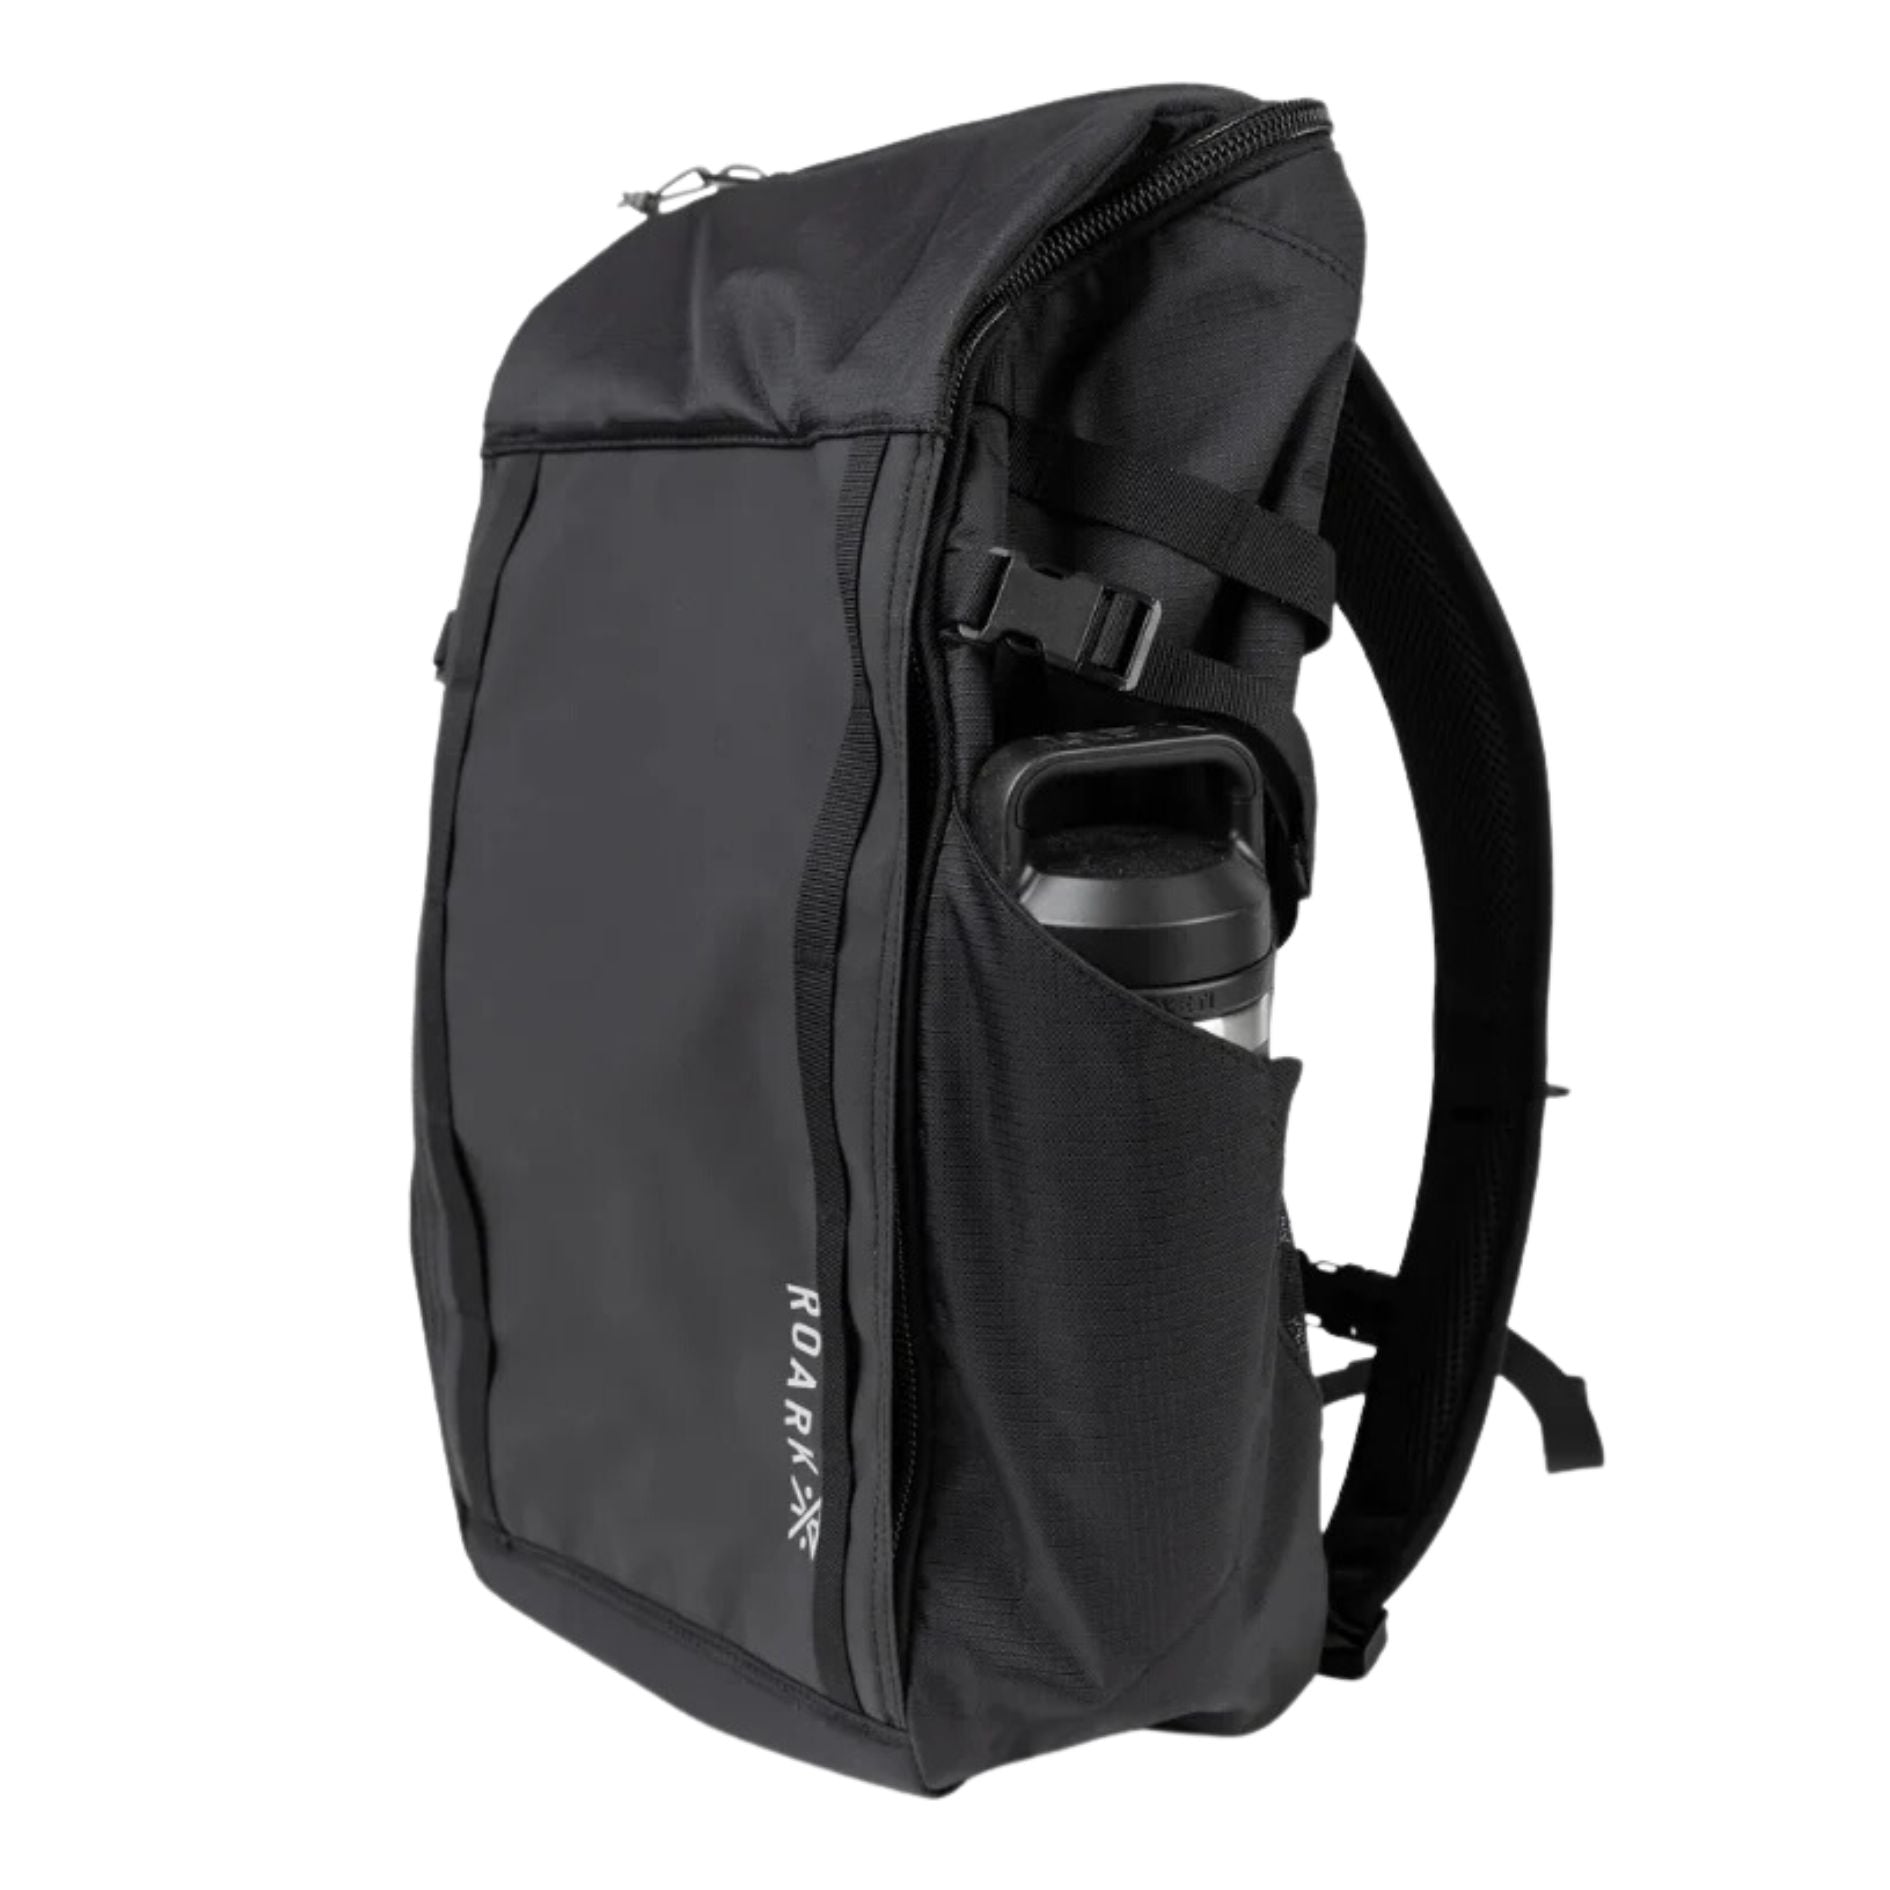 Accomplice Mule 25L Backpack